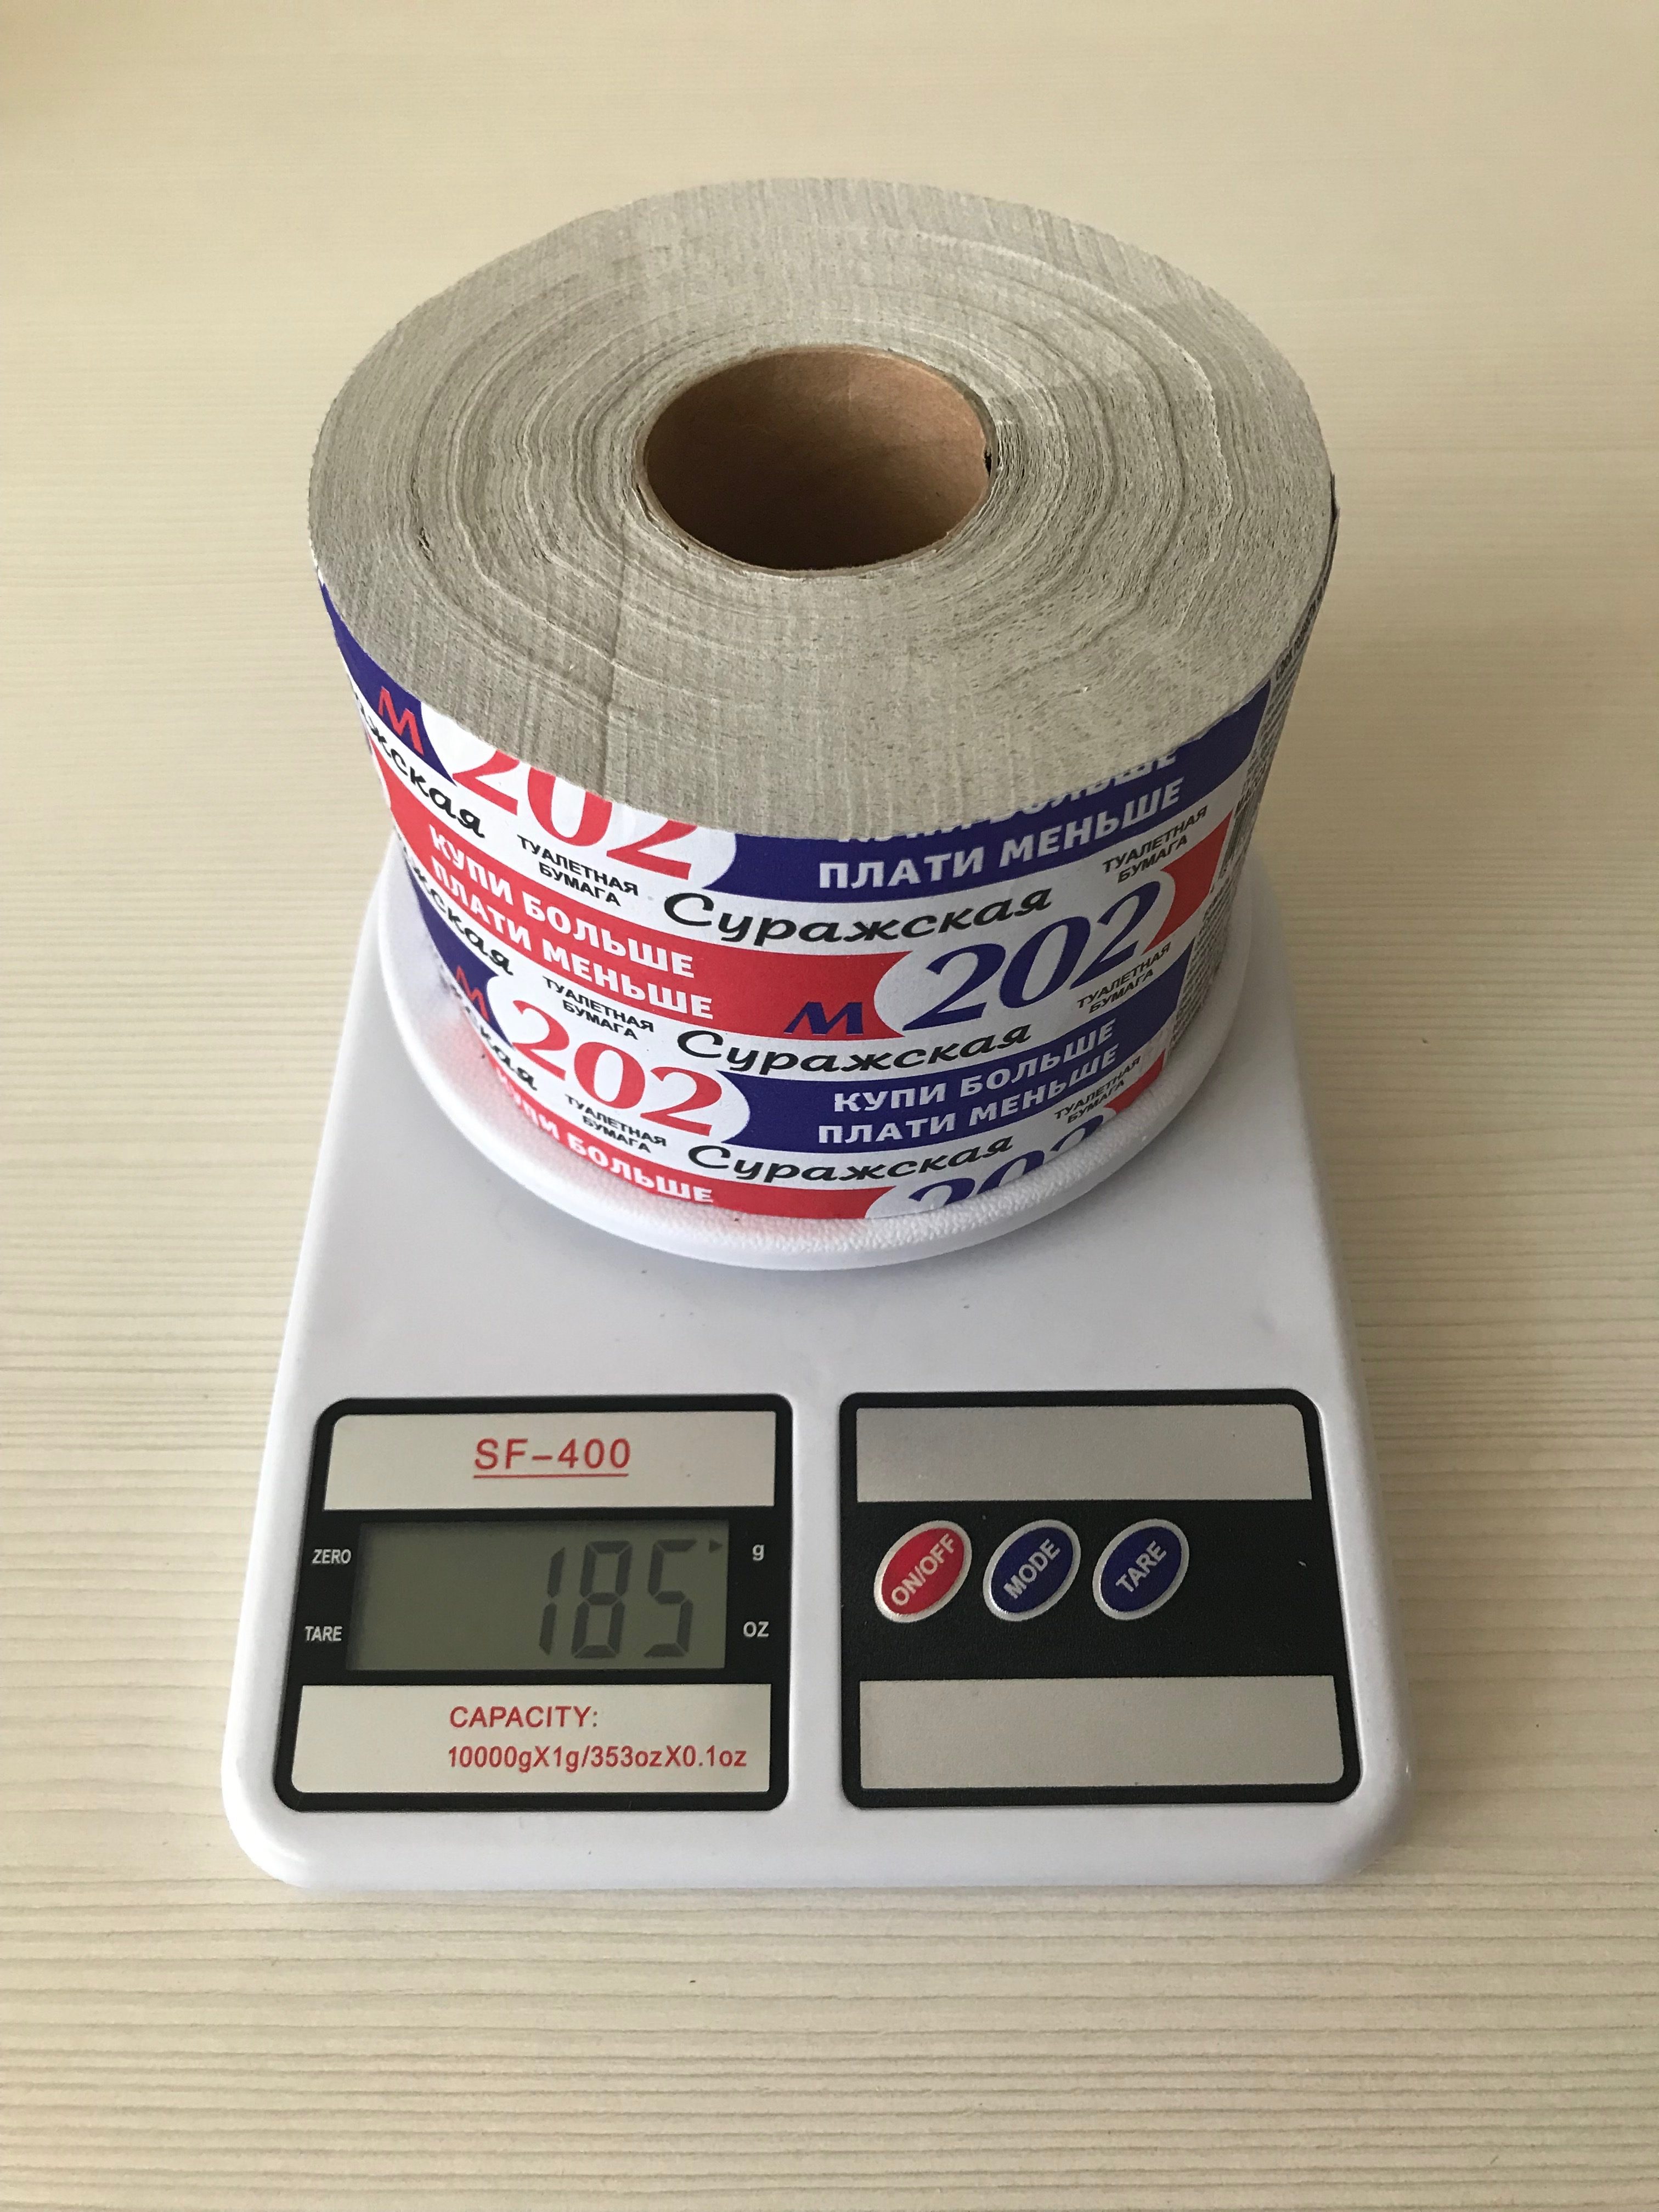 How much does a toilet paper roll weigh?